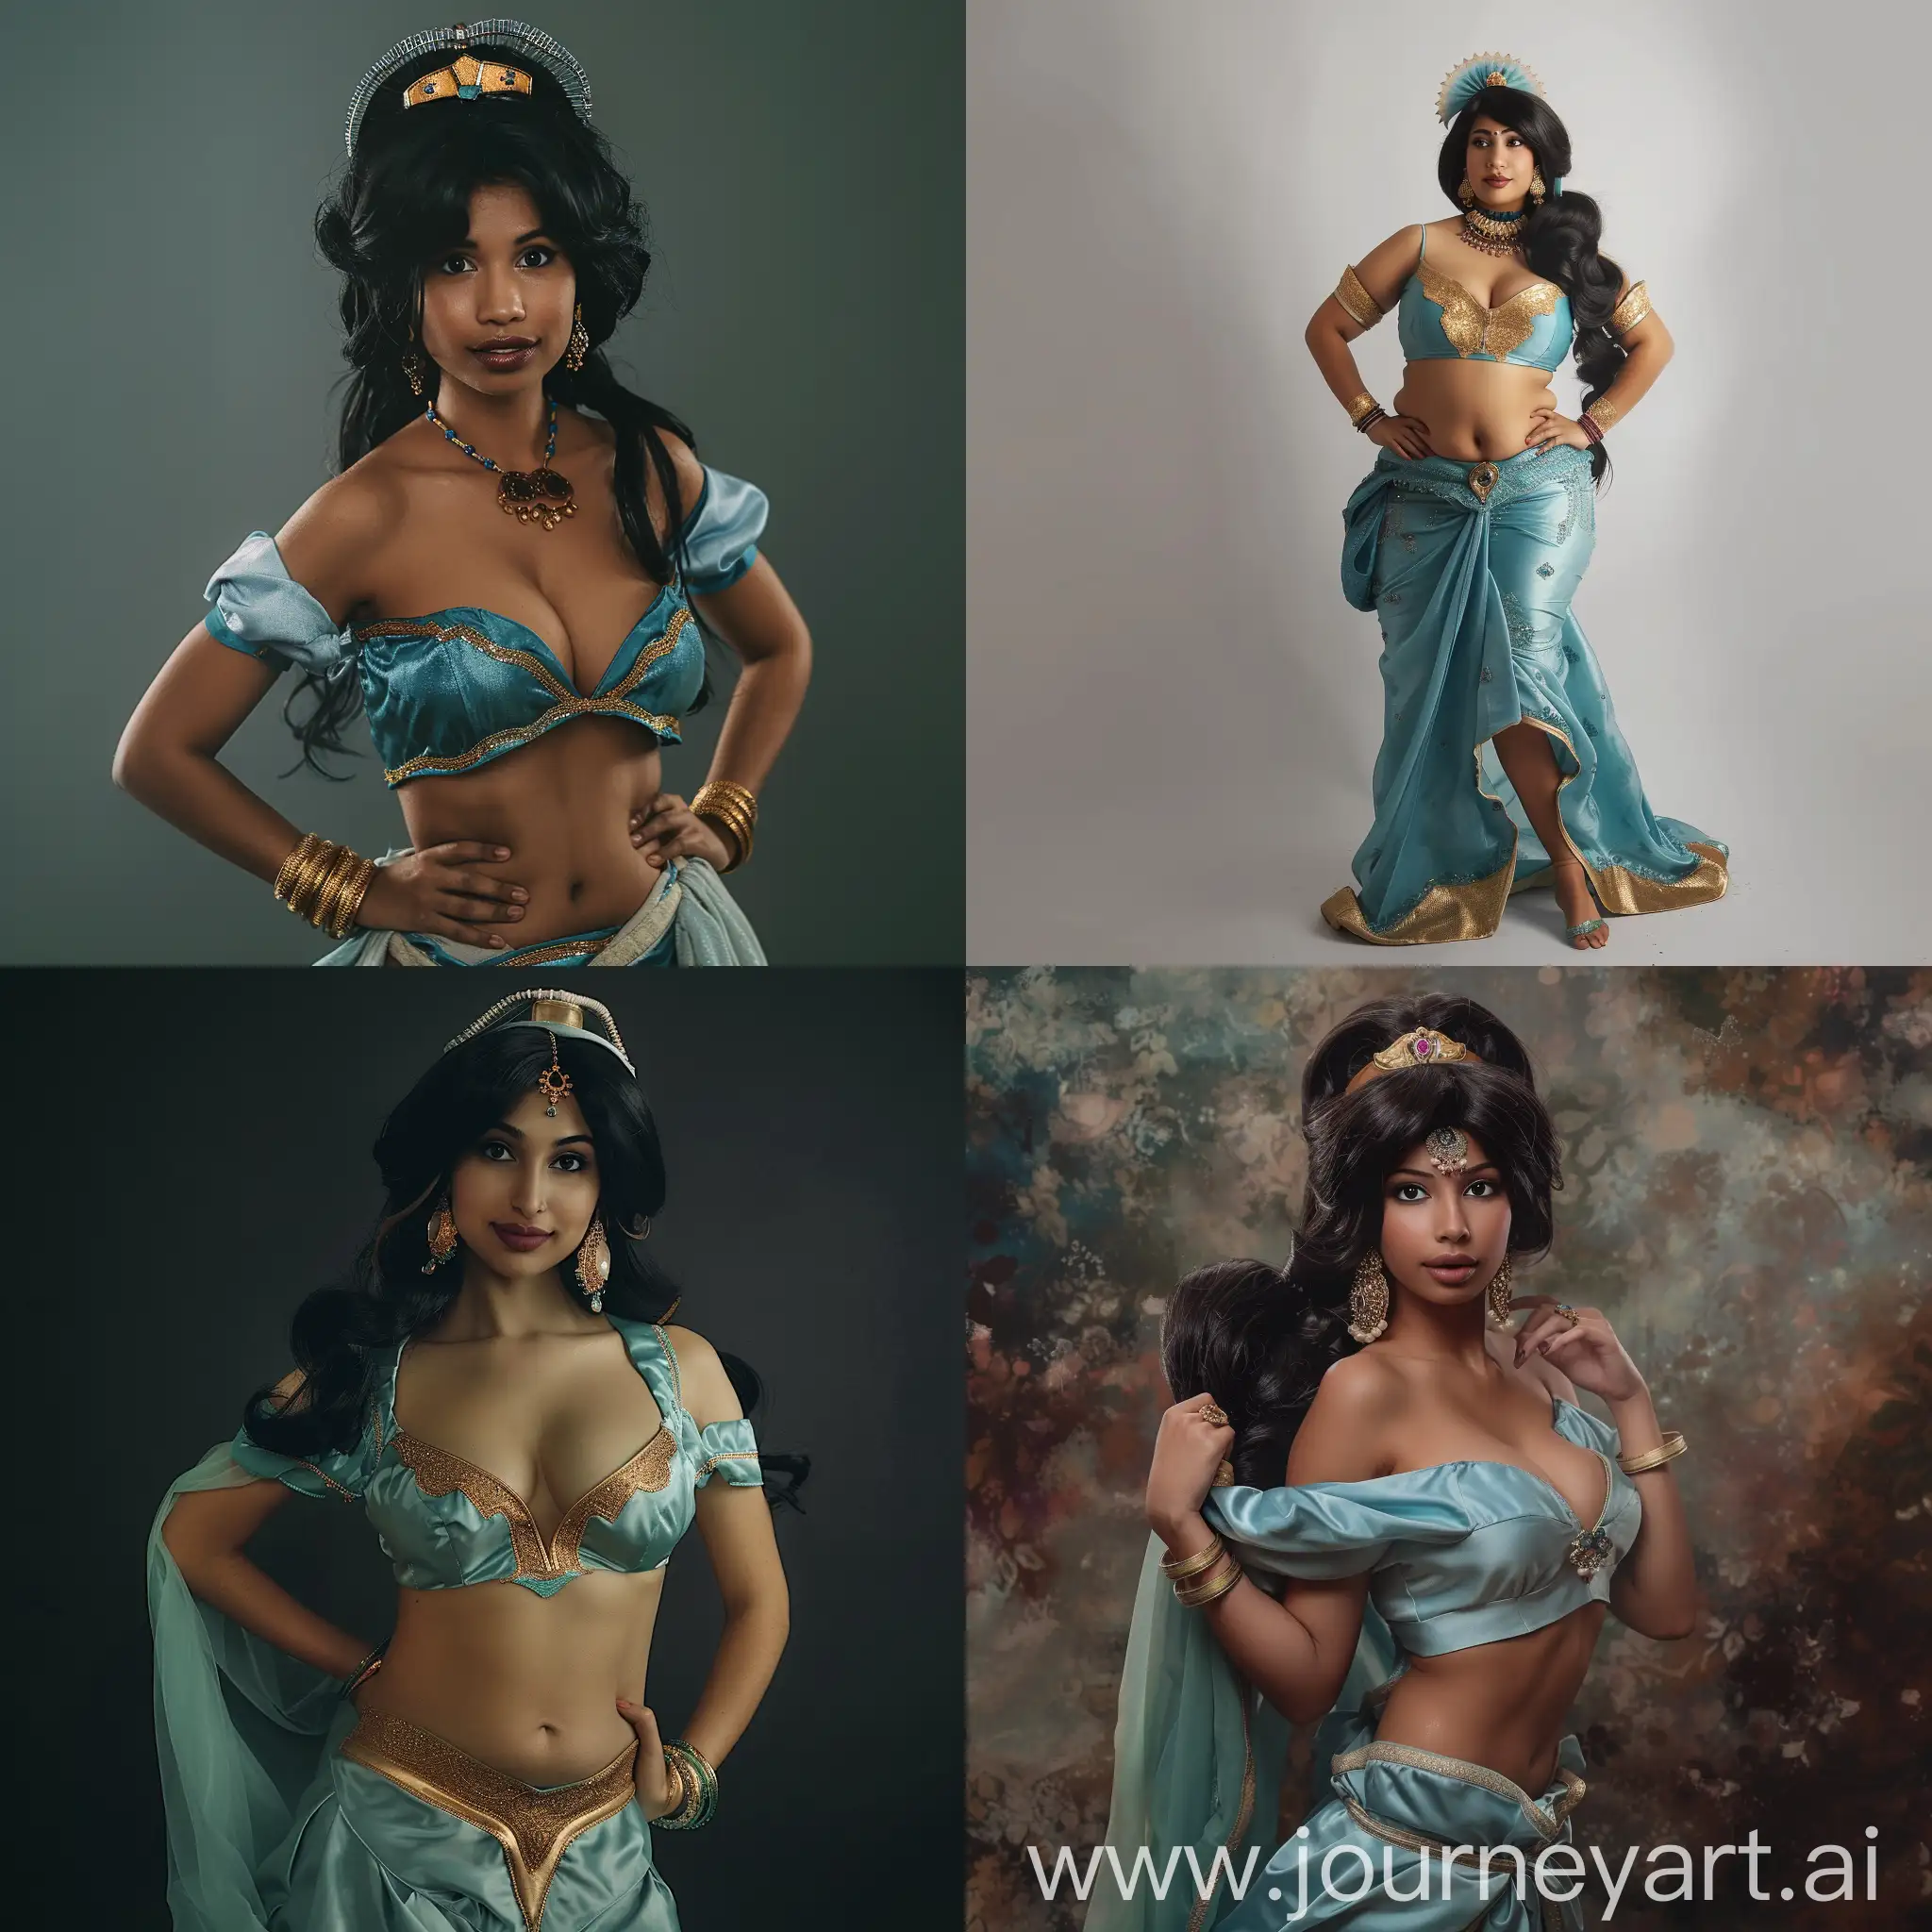 Confident-Indian-Woman-Poses-as-Disneys-Jasmine-in-UltraRealistic-Photo